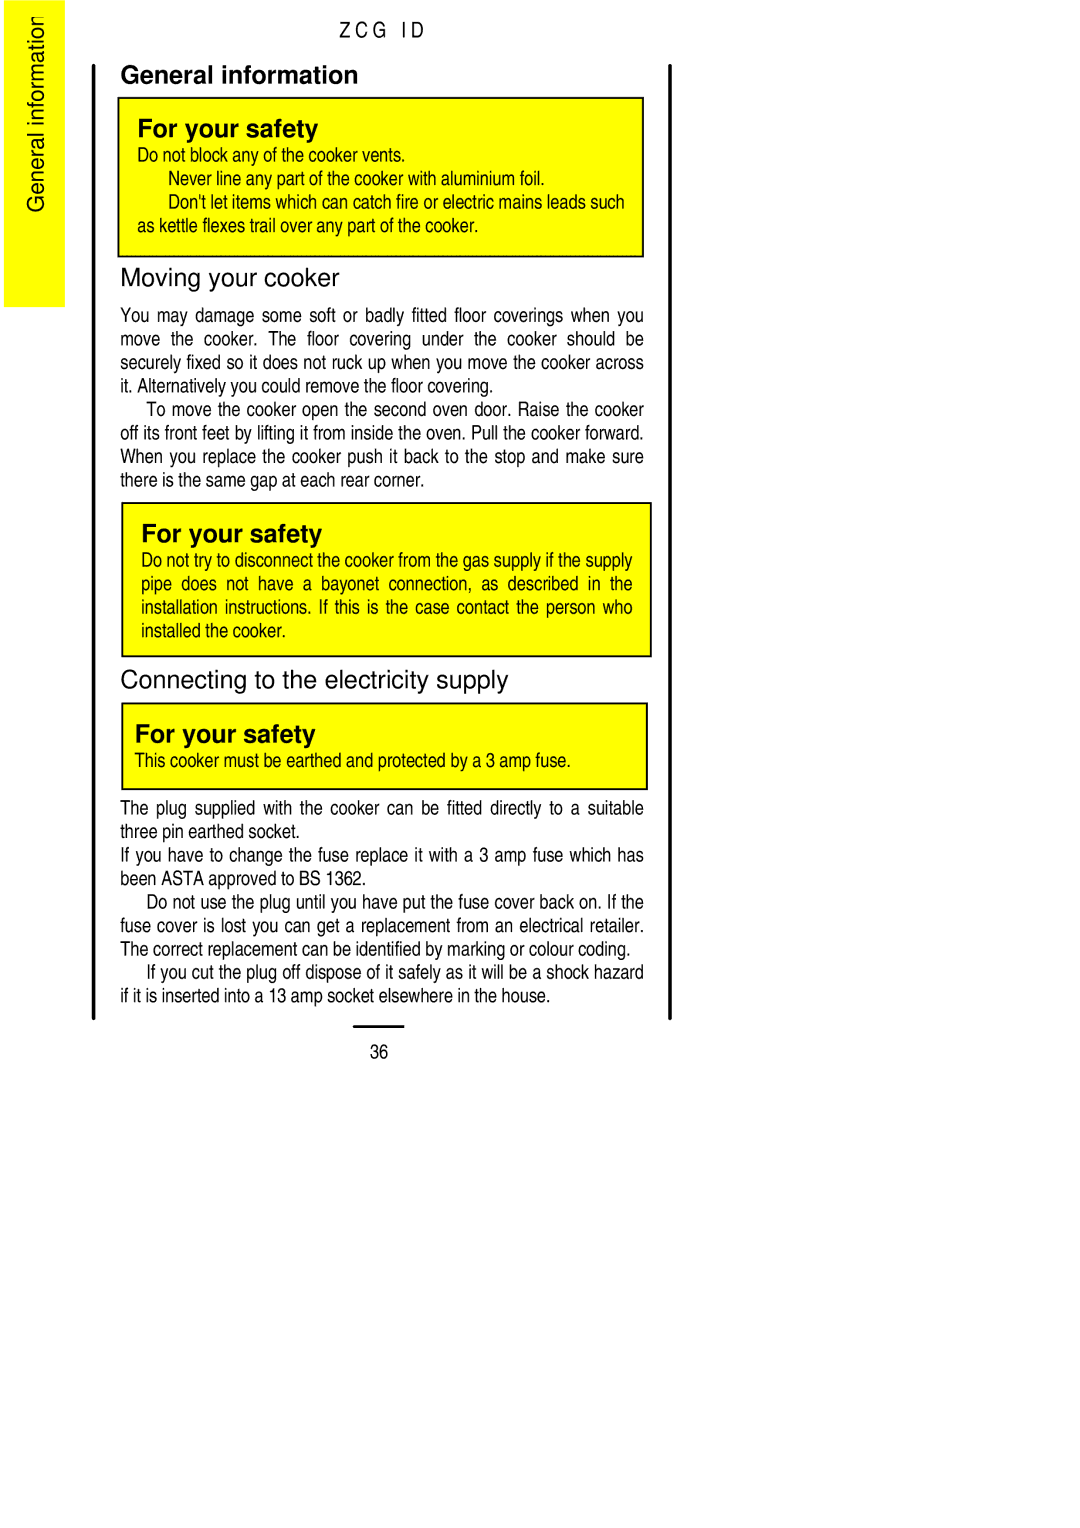 Zanussi ZCG ID manual General information For your safety, Moving your cooker, Connecting to the electricity supply 